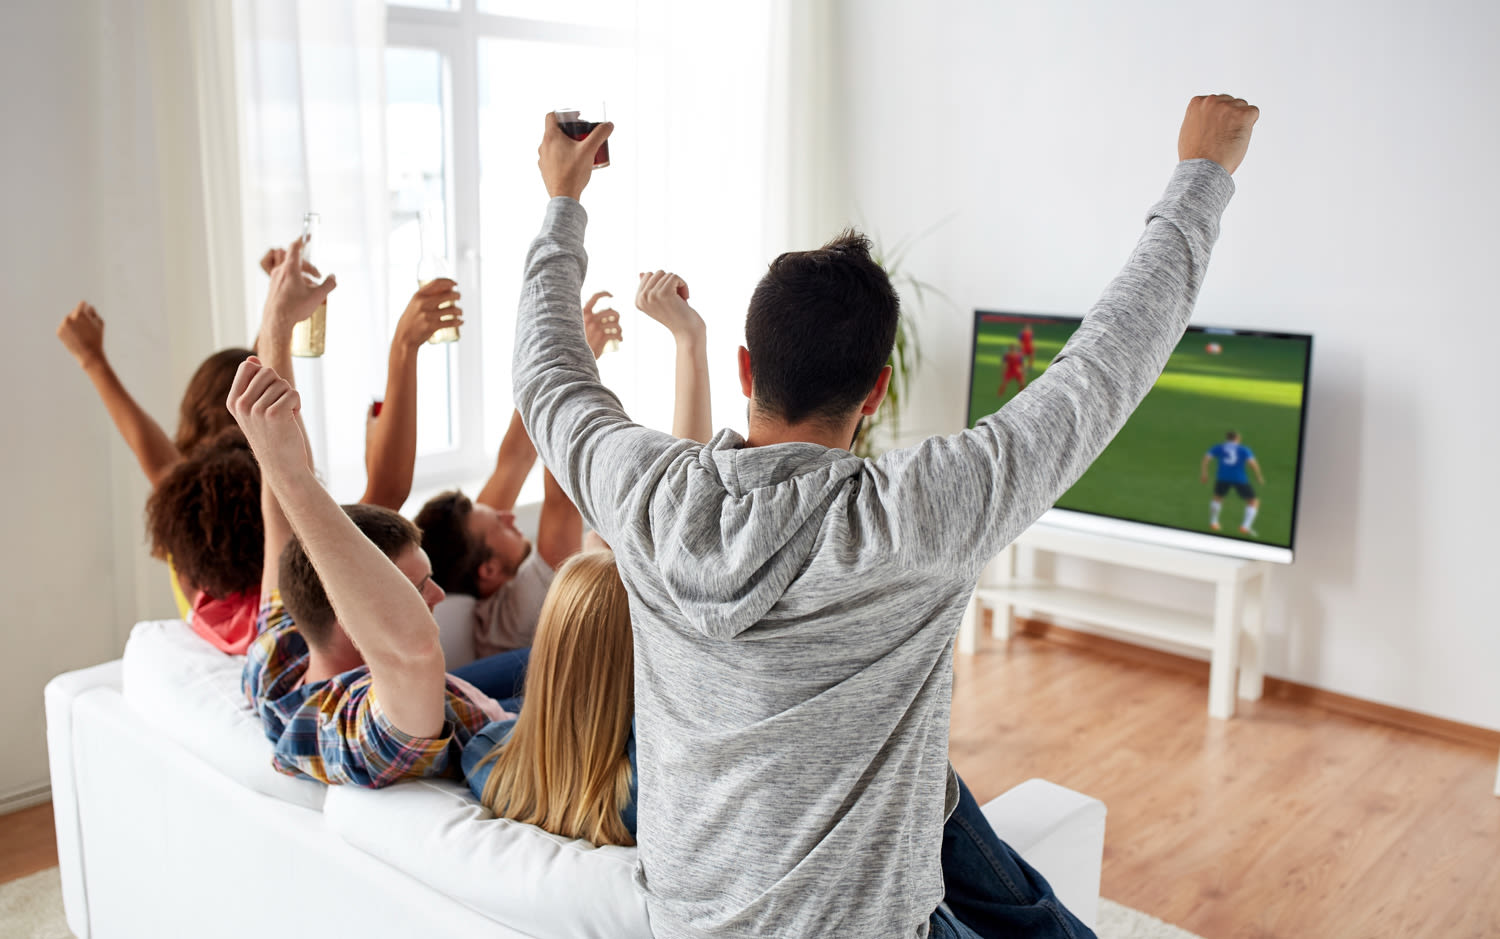 A group of friends watching a football match on television together